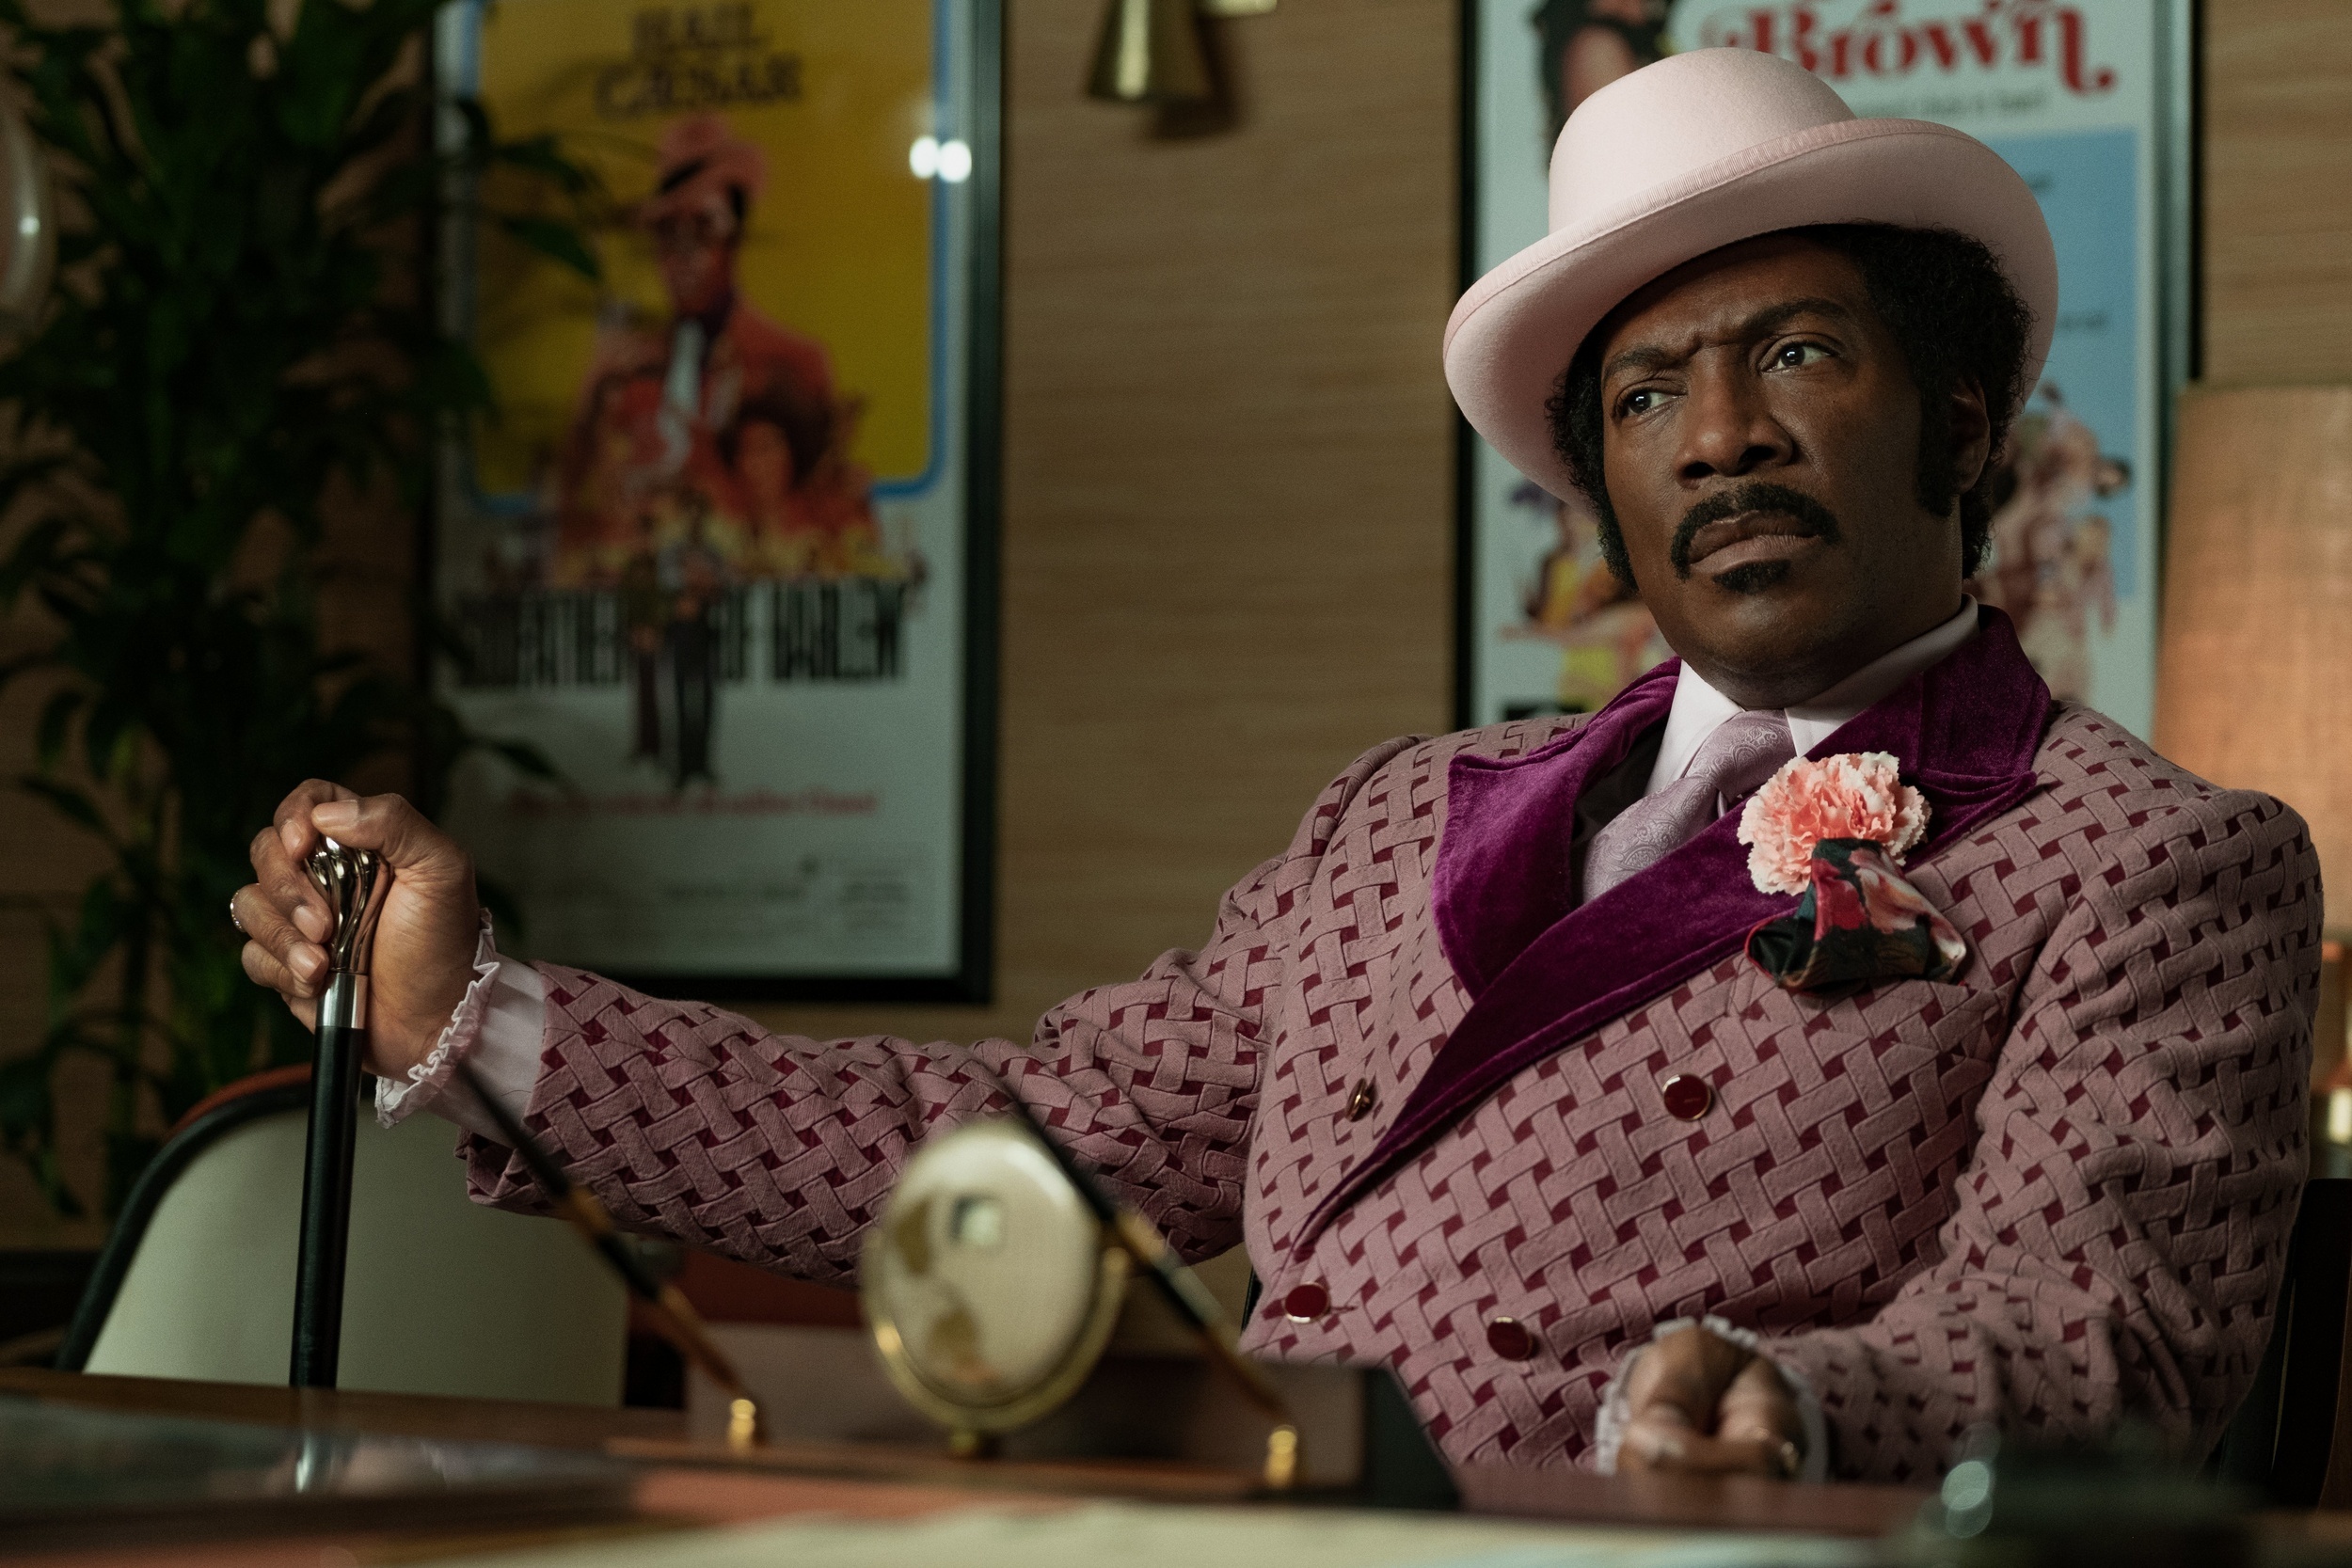 <p>Comedy legend Eddie Murphy made his long-awaited return to the silver screen in 2019’s hilarious romp <em>Dolemite Is My Name</em>. The film tells the true story of performer Rudy Ray Moore, who creates the iconic 1970s Blaxploitation character Dolemite. Featuring flashy costumes, big hair, and groovy music, the comedy is surprisingly heartfelt, and Murphy creates a crazy character you can’t help but root for. <em>Dolemite</em> is a career-best and a reminder that Murphy's still got it. </p><p>You may also like: <a href='https://www.yardbarker.com/entertainment/articles/the_most_anticipated_albums_of_2024/s1__39987432'>The most anticipated albums of 2024</a></p>